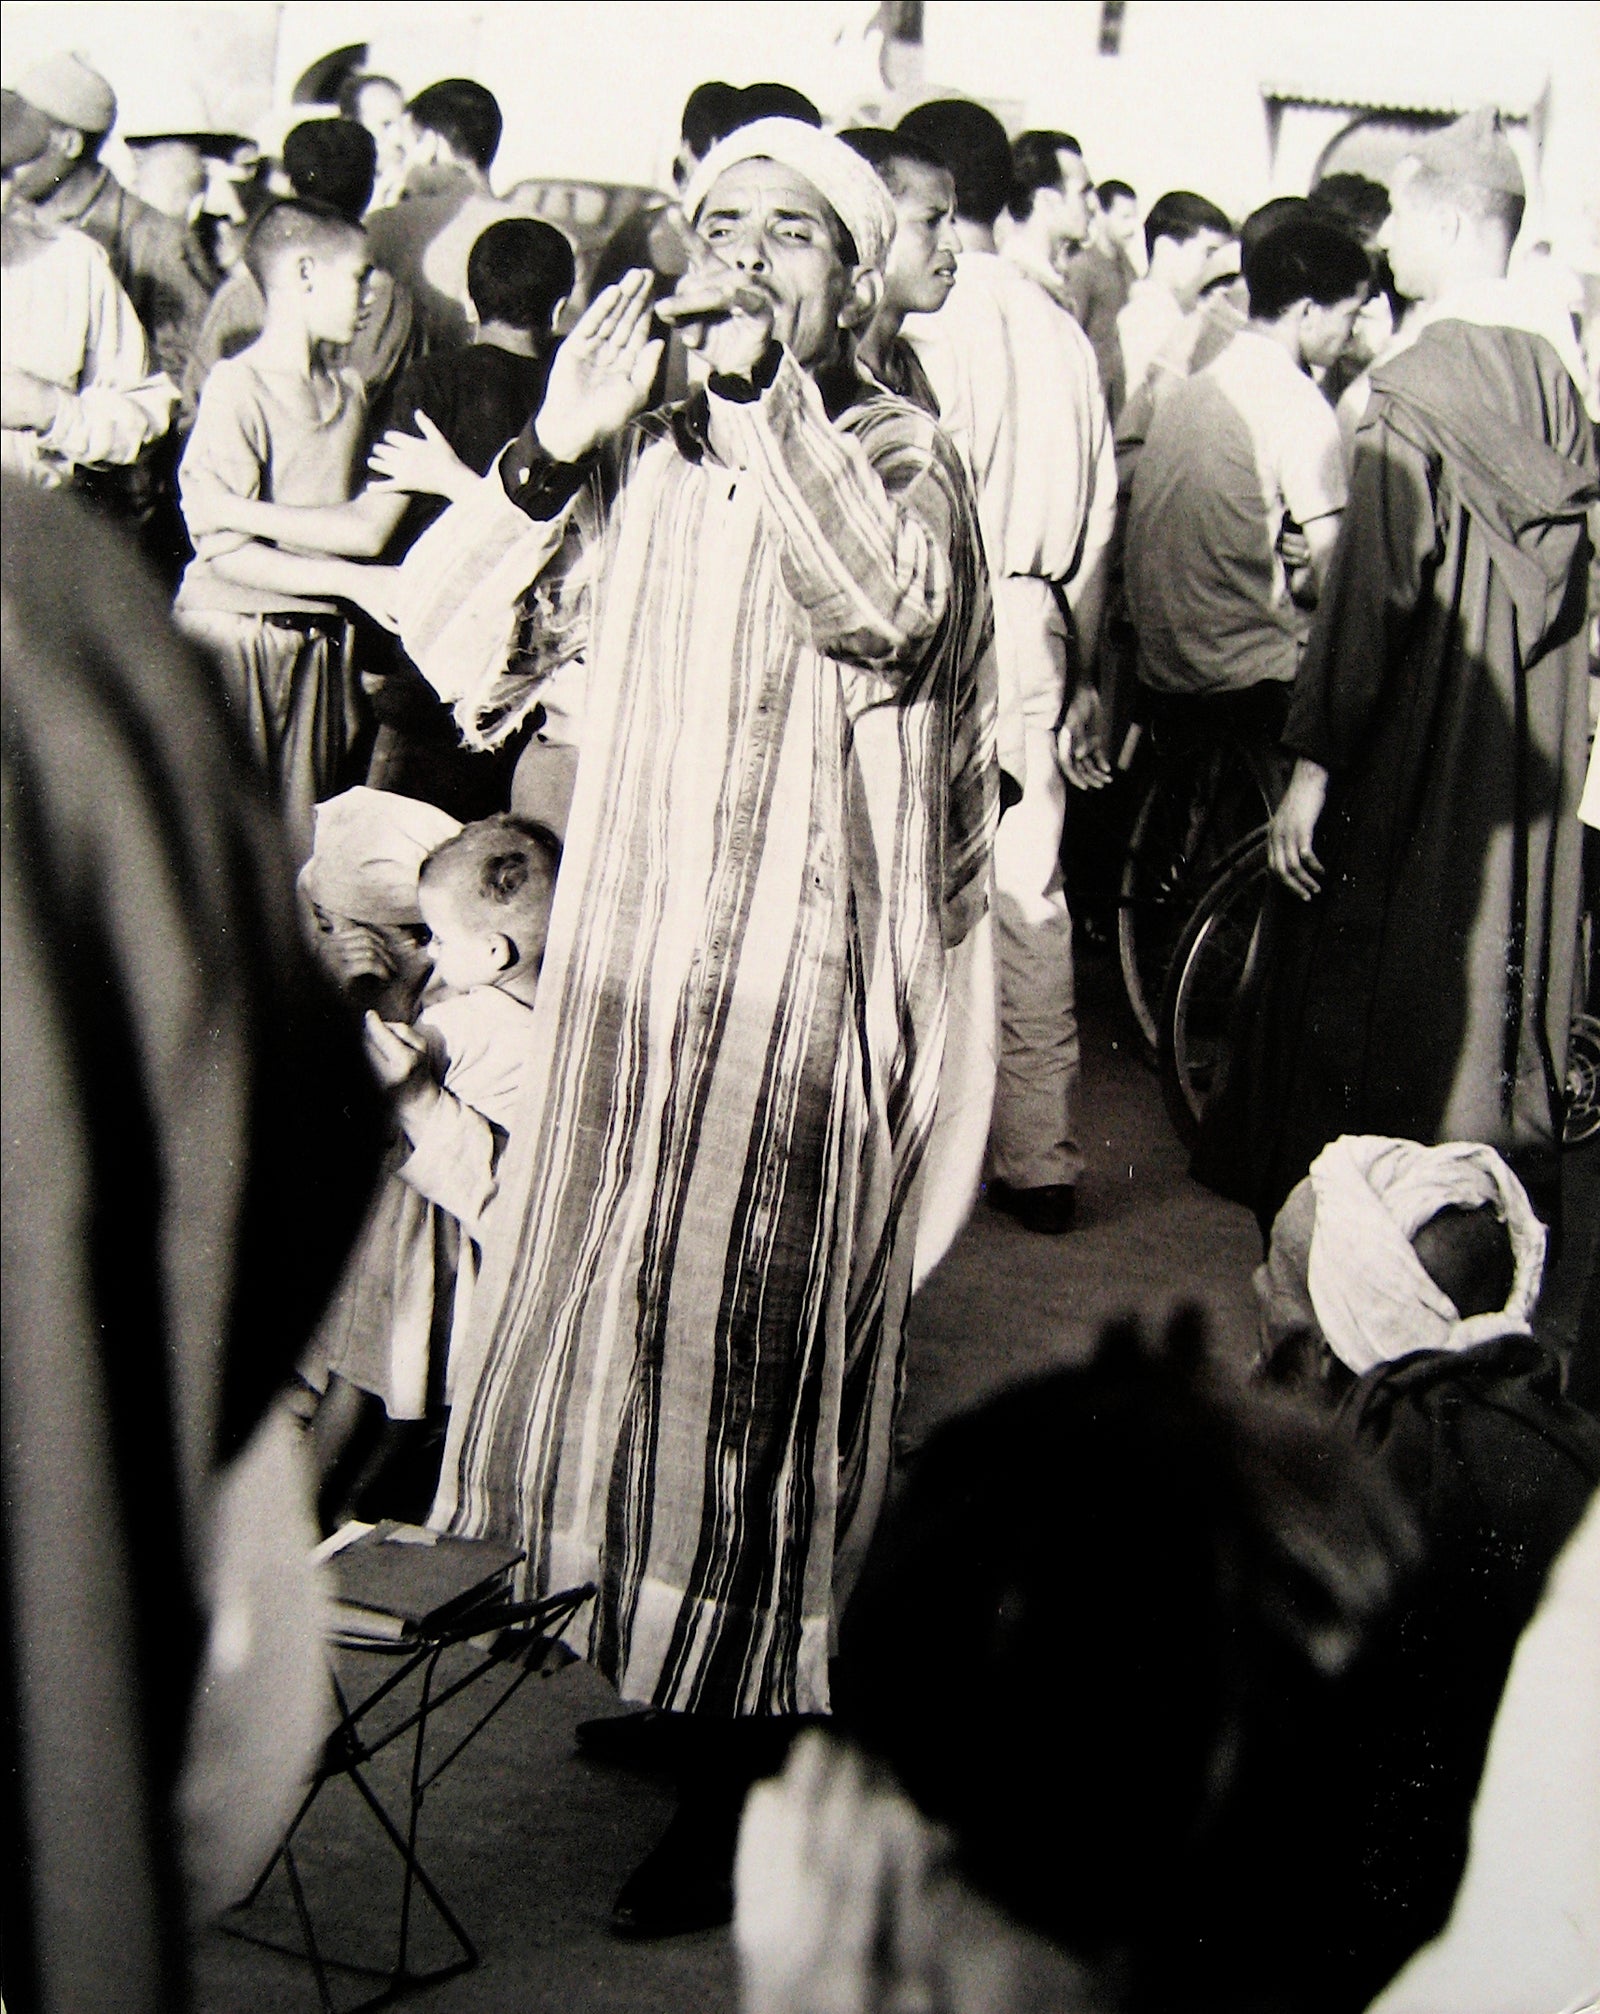 Street Performer <br>1960s Photograph <br><br>#16239